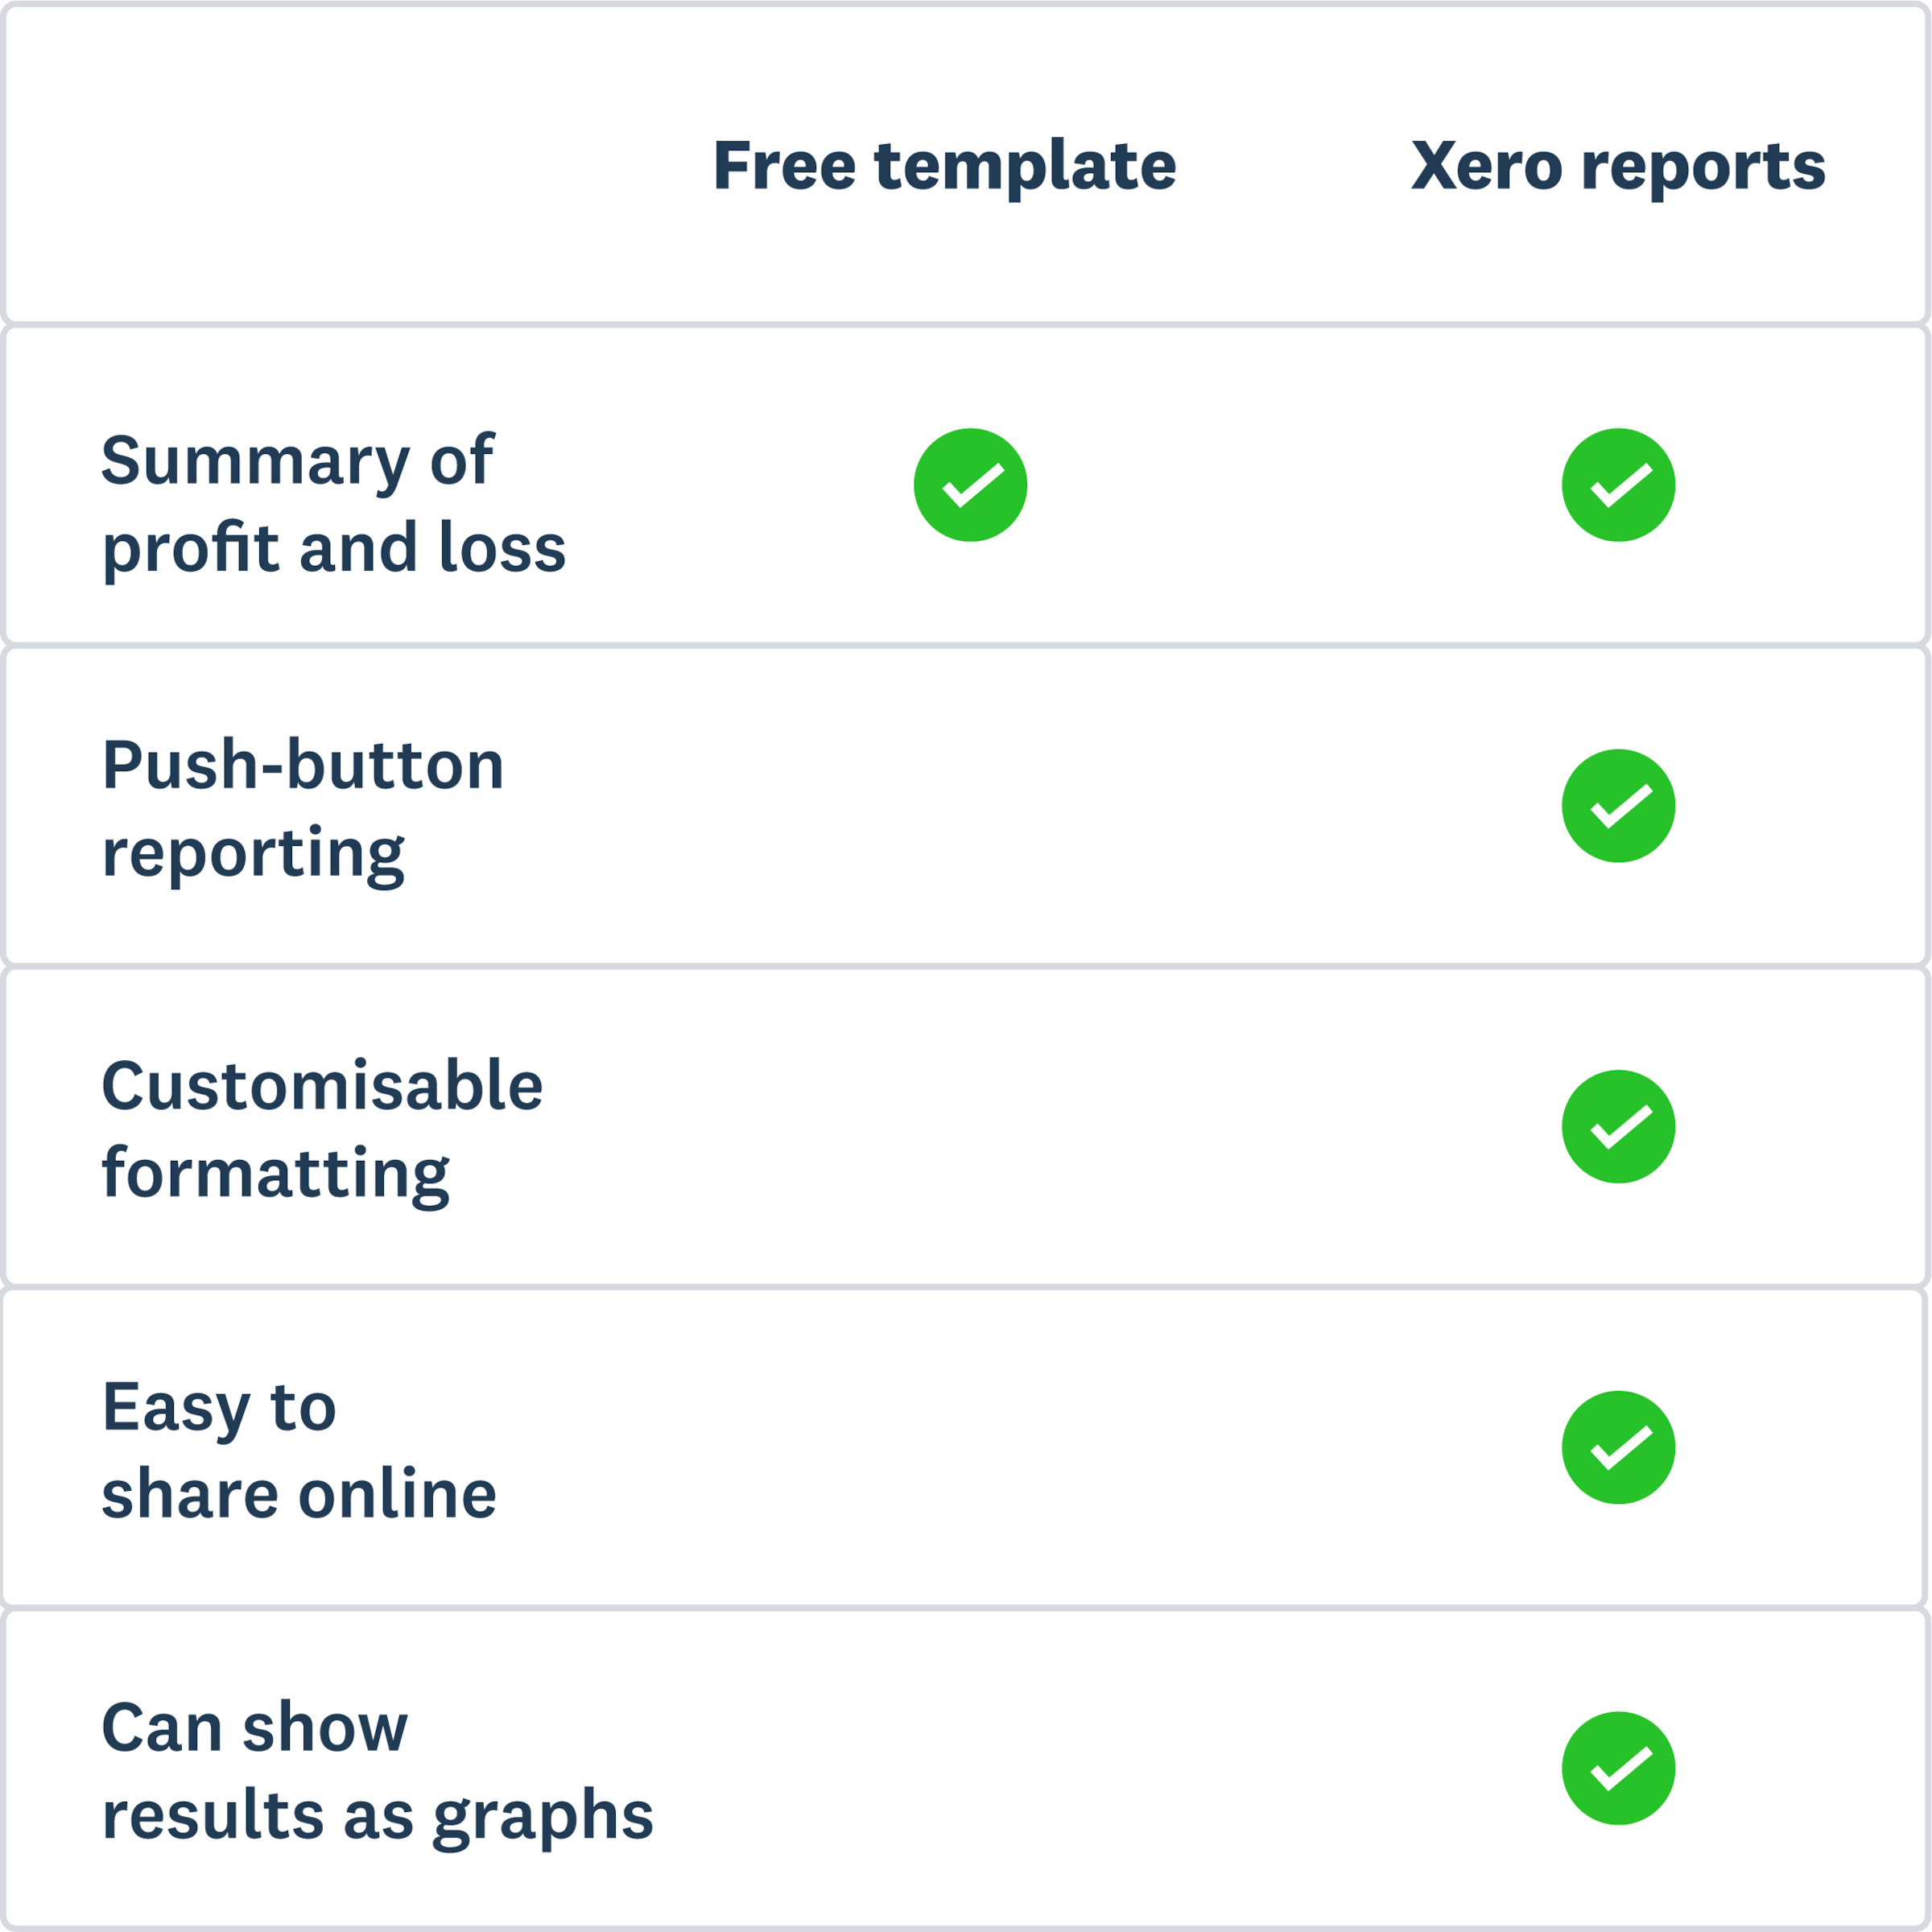 Table shows Xero gives push-button reporting, customisable formats, online sharing, and can visualise results. 